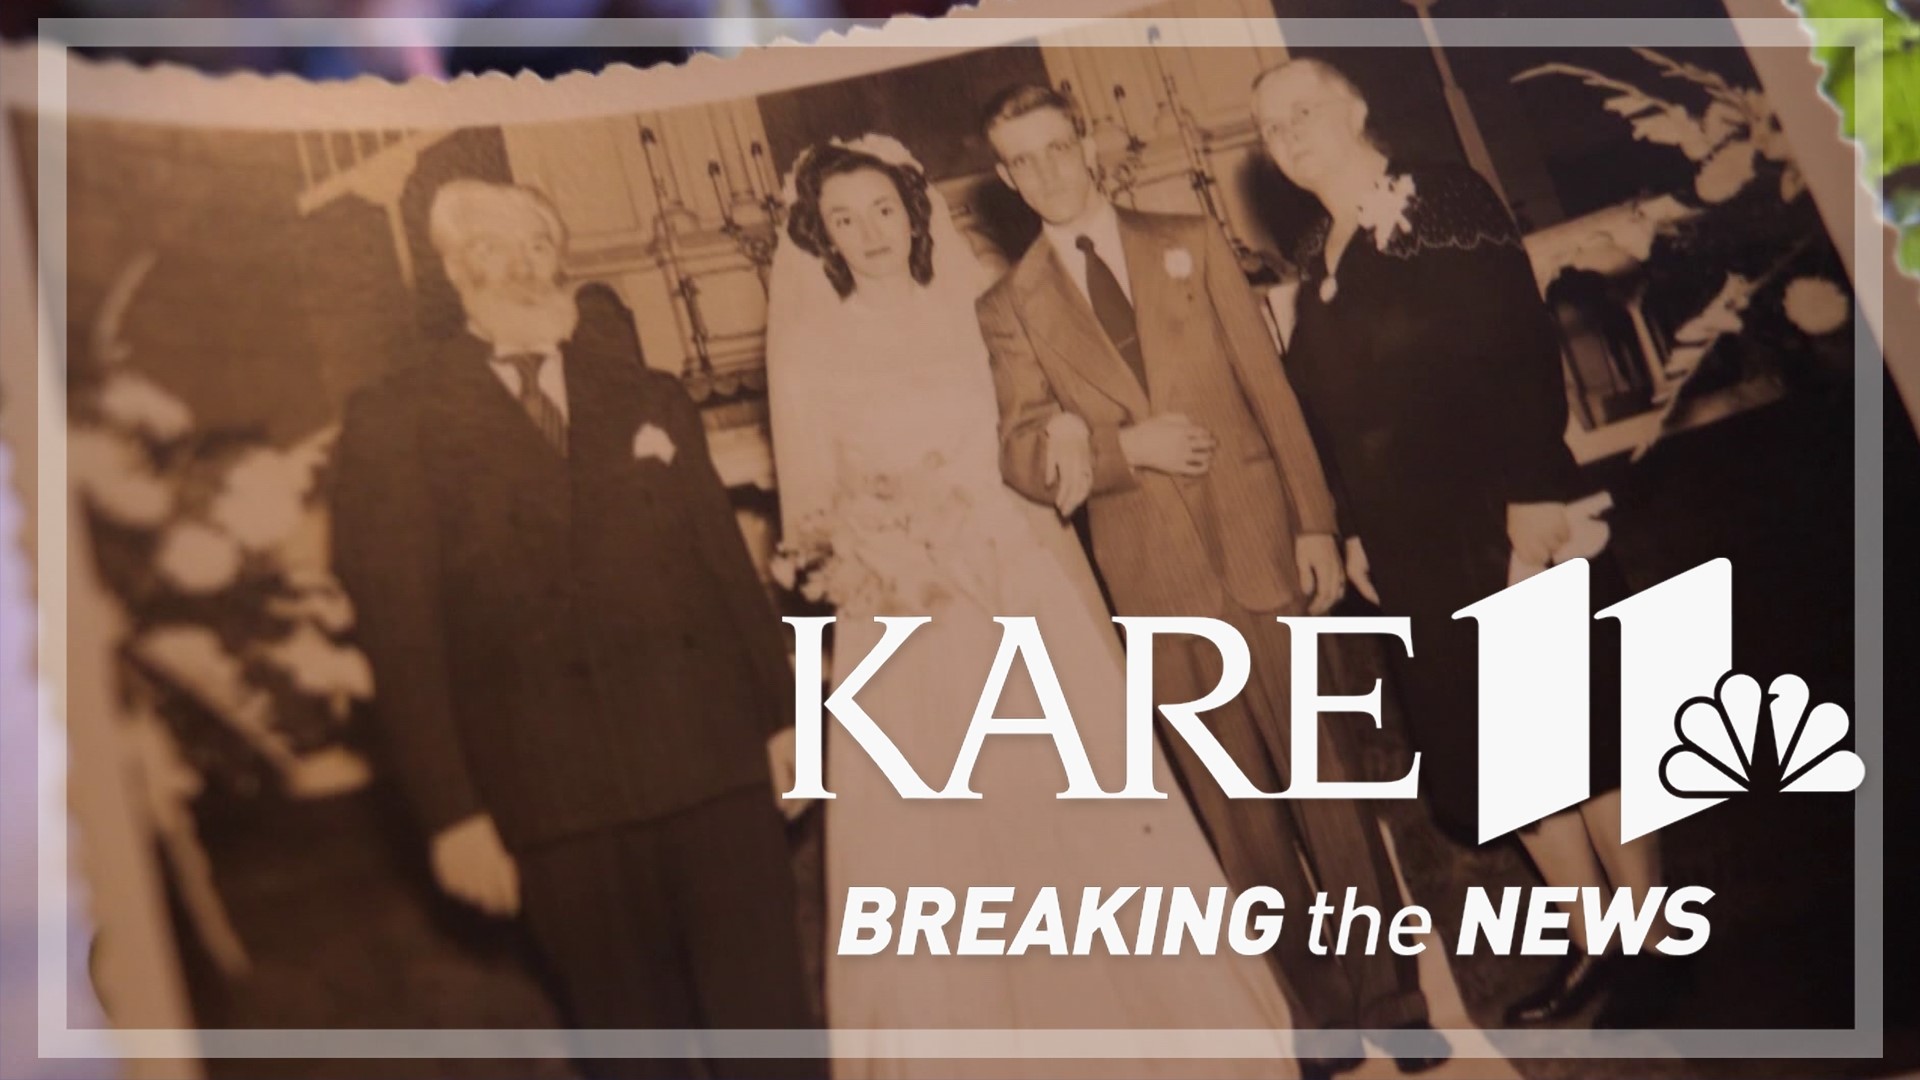 The Minnesota couple will also celebrate 75 years of marriage in August.